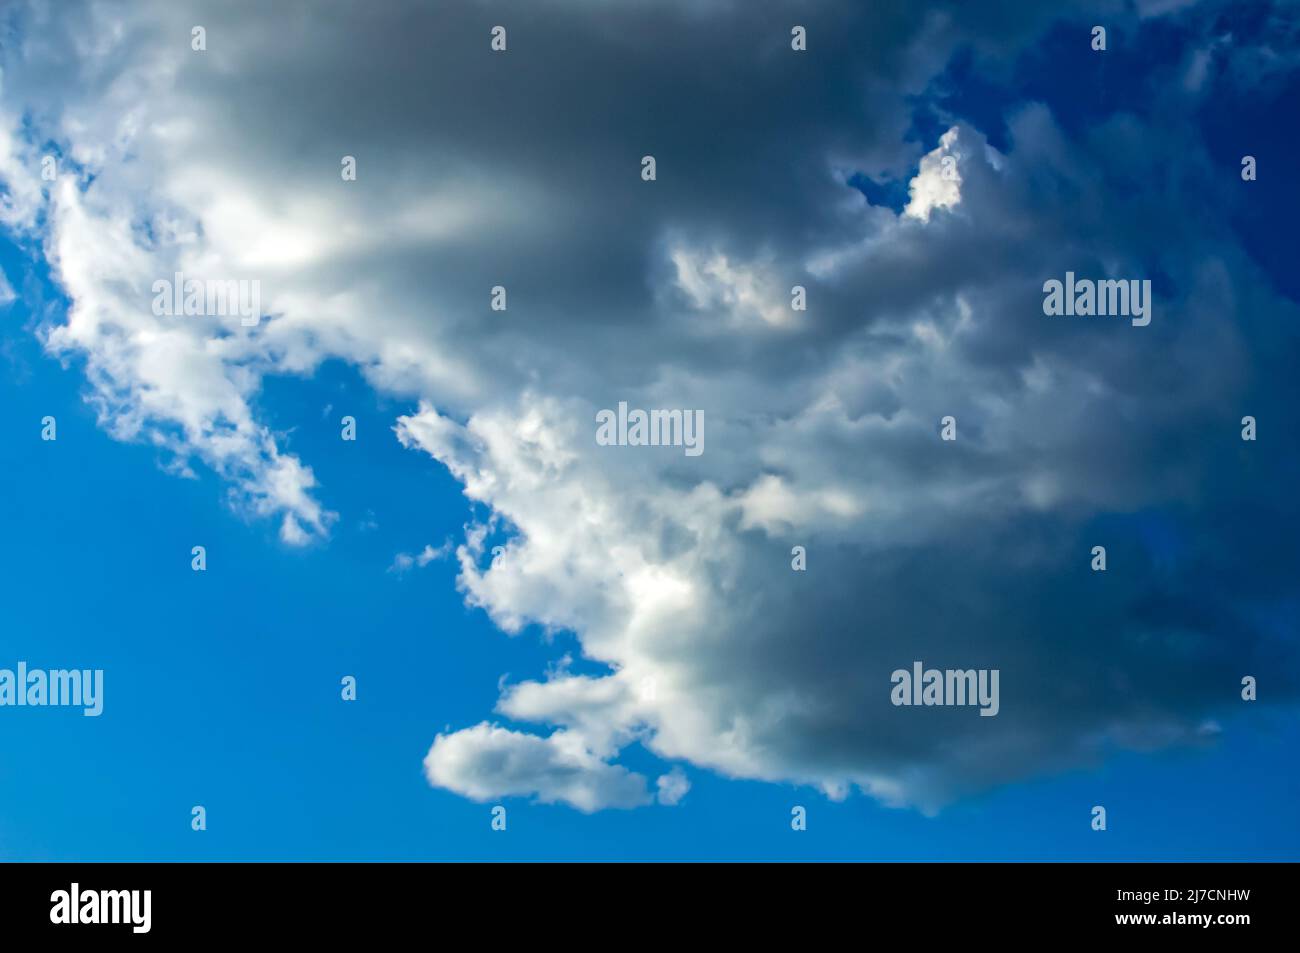 blue sky with fluffy clouds Cumulus, Stratocumulus, clouds lit by side light, background with clouds Stock Photo